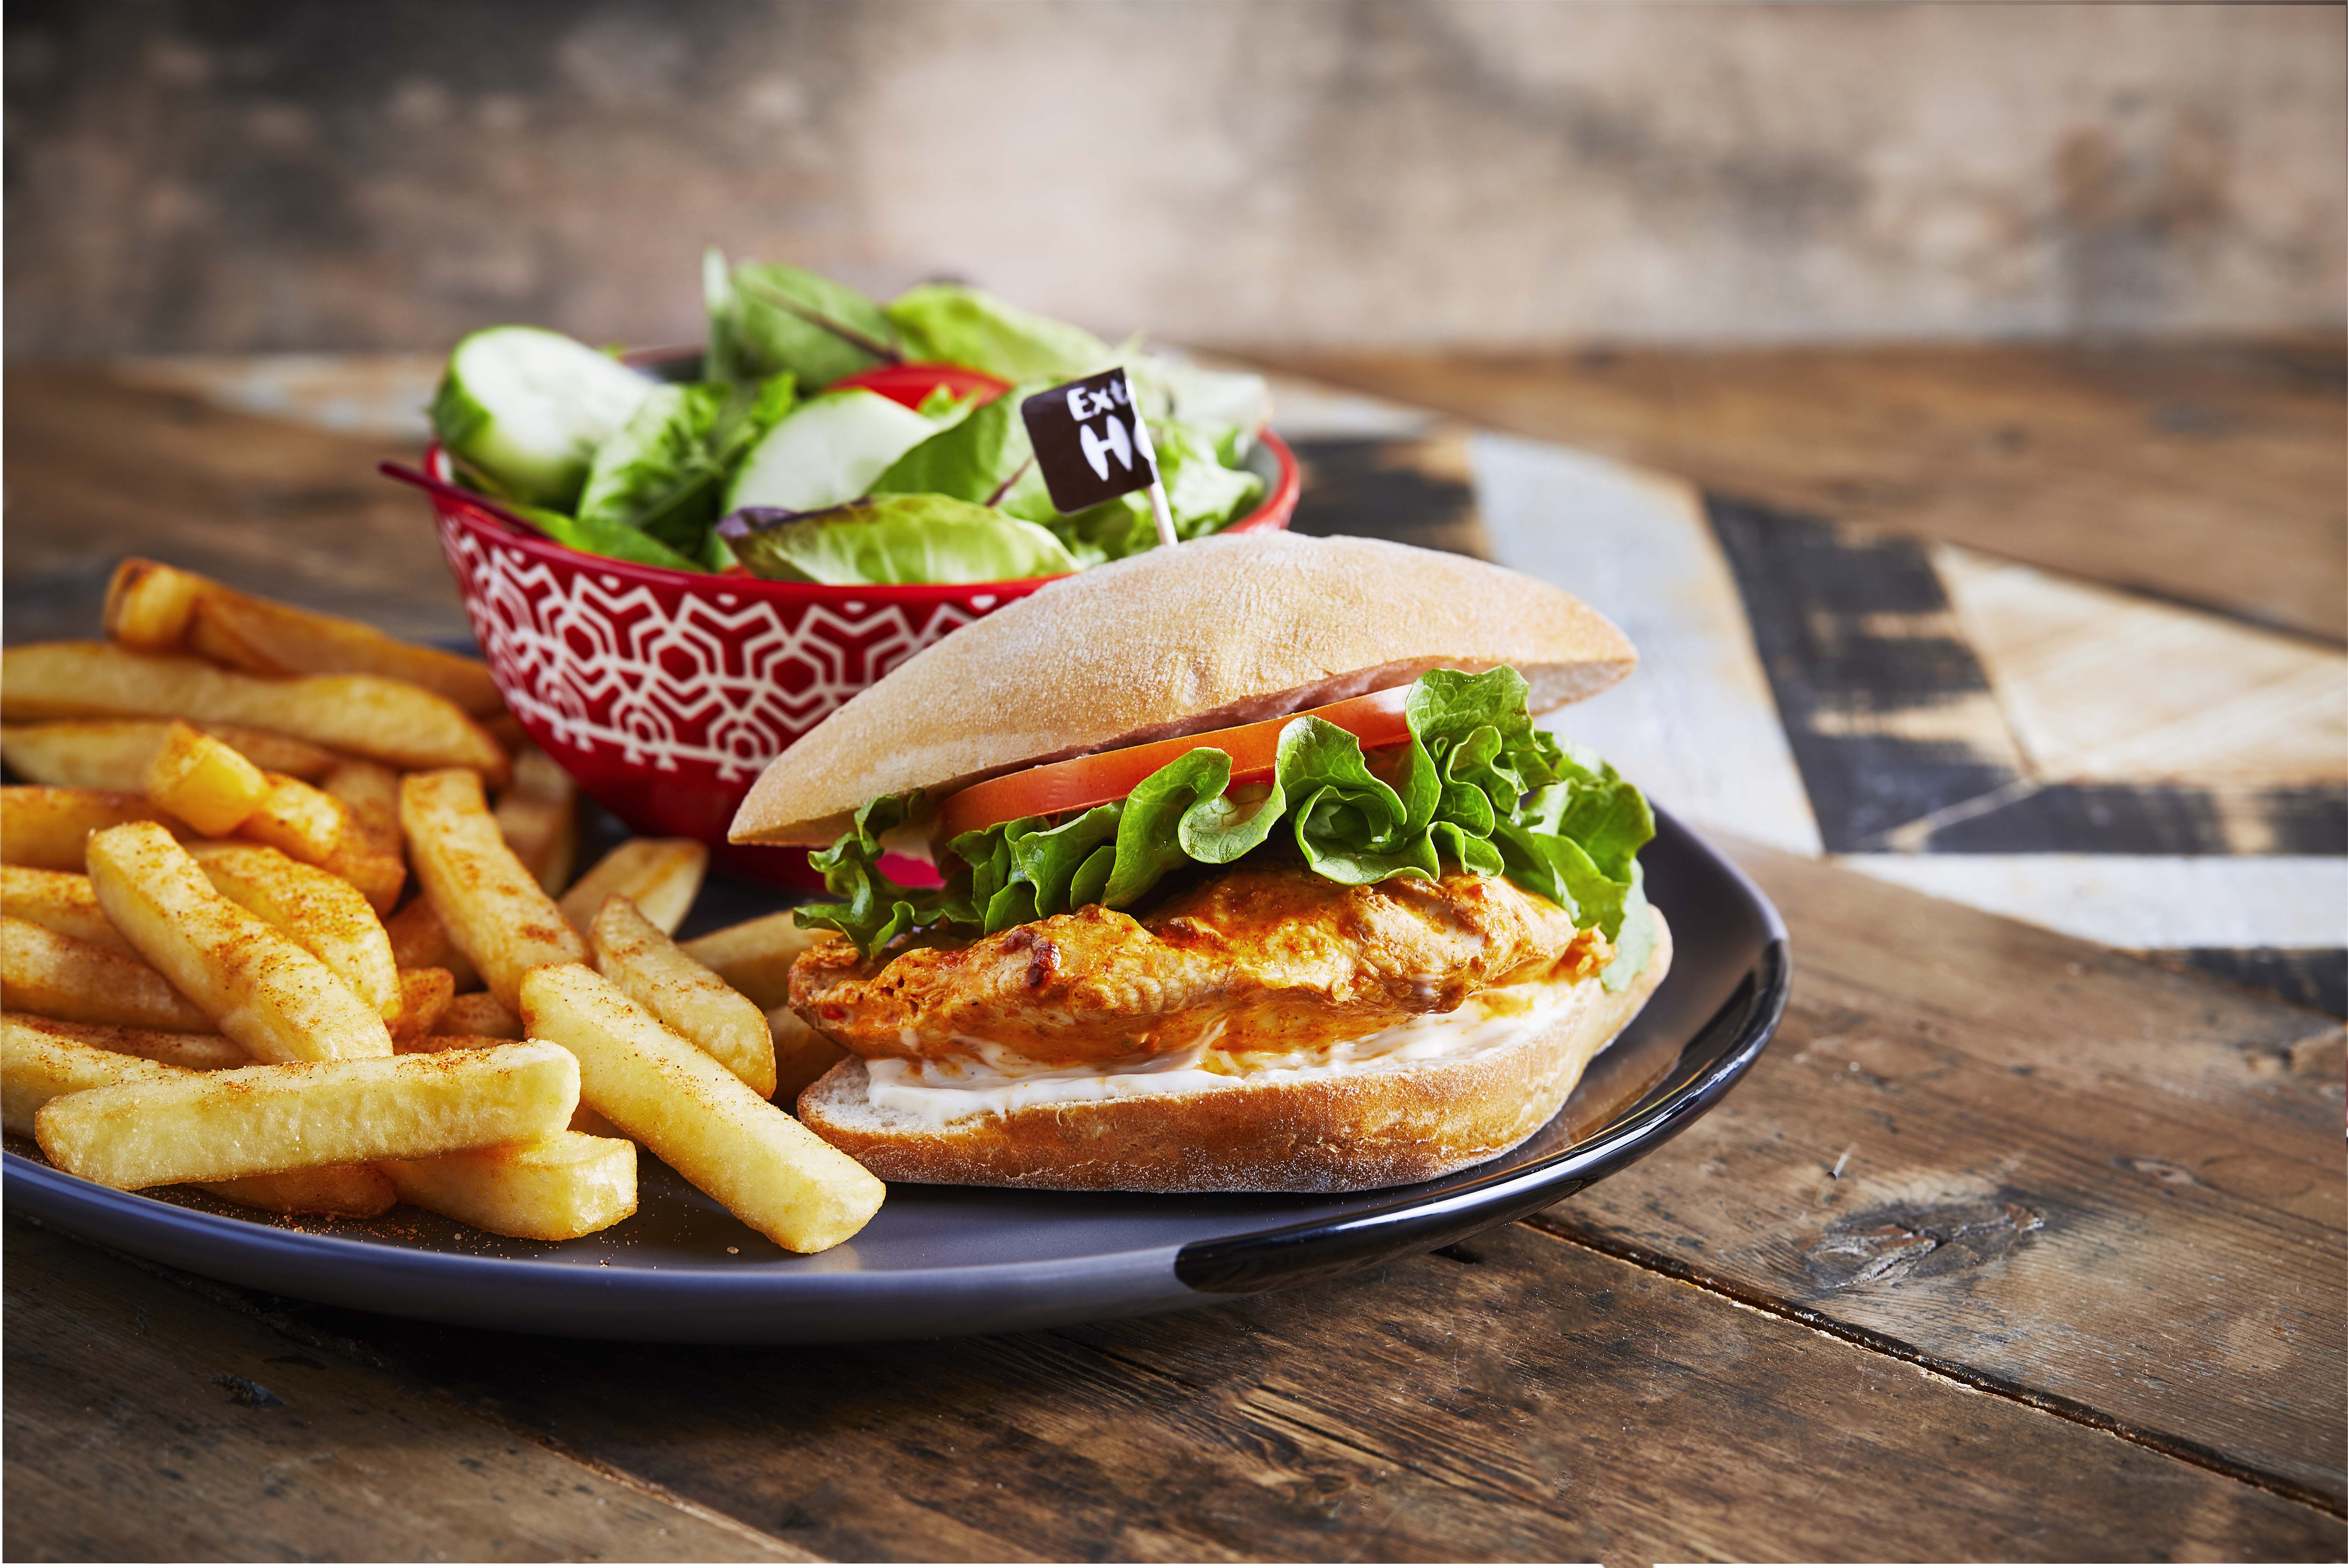 Stop by for a 'cheeky' Nandos.